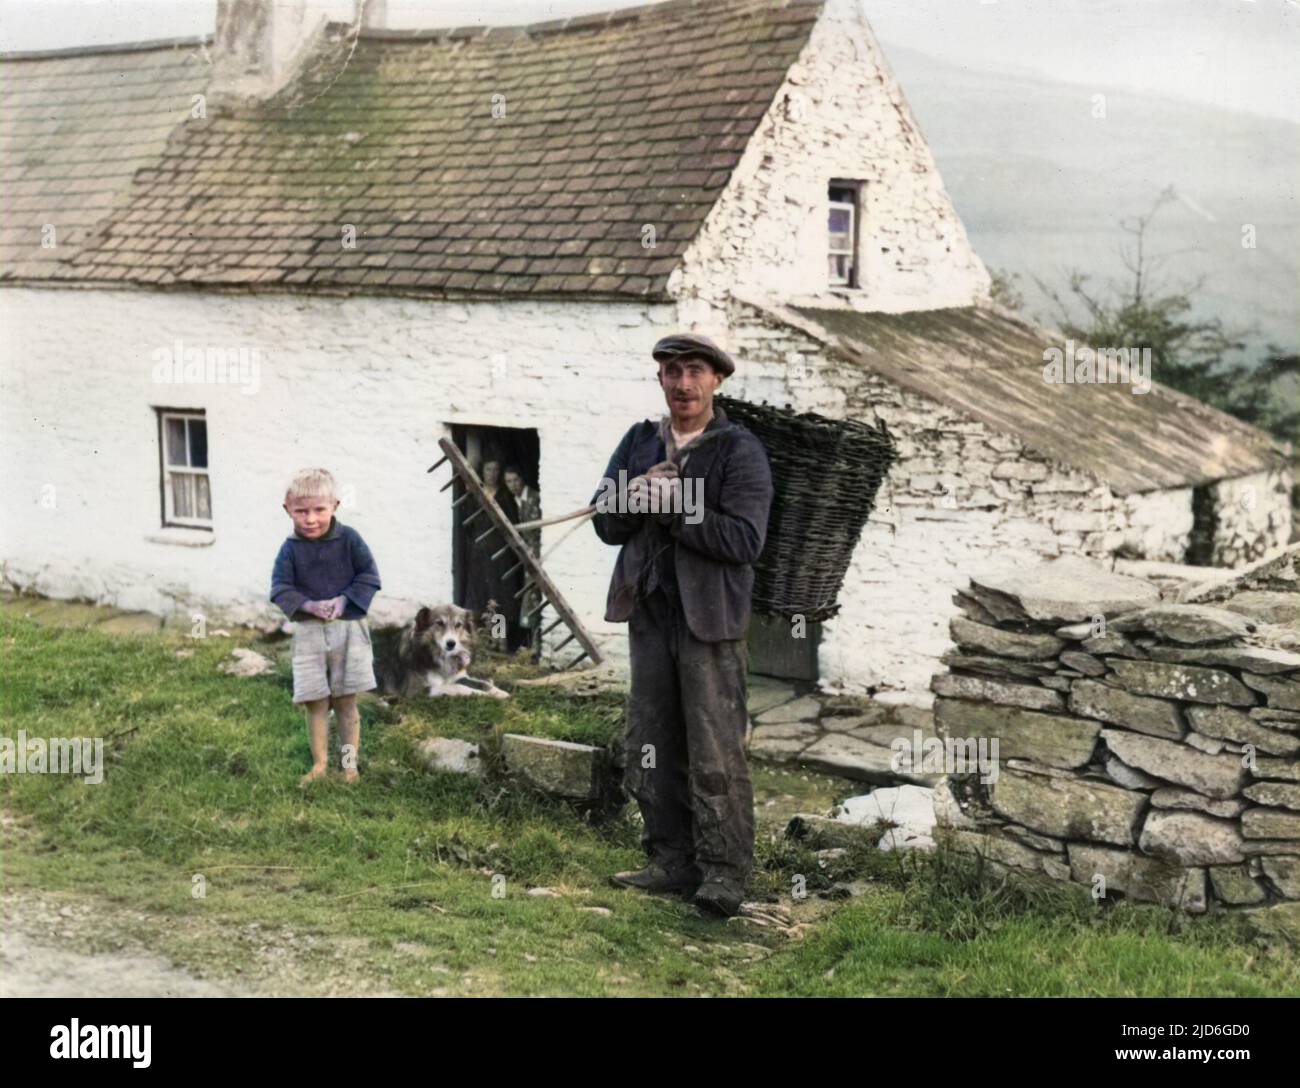 A man delivering peat in a basket to a typical Irish cottage, watched by a little boy and two women in the doorway. Colourised version of : 10171057       Date: Oct-38 Stock Photo